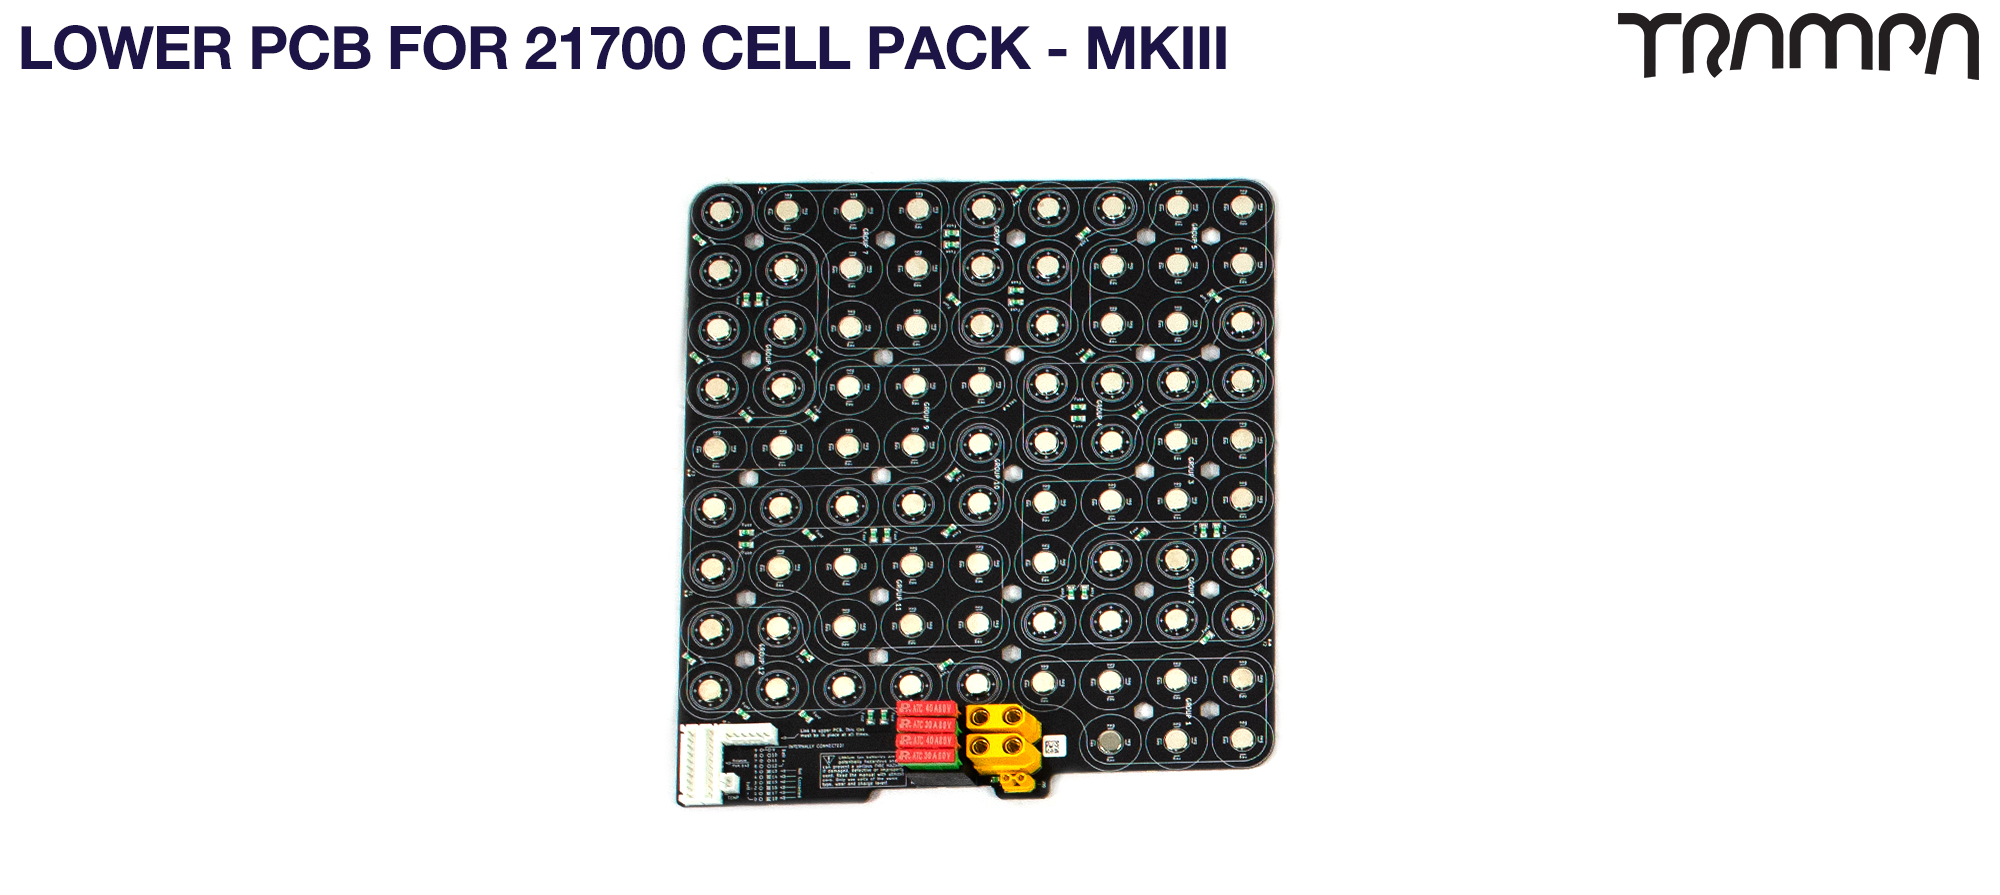 LOWER PCB for 21700 Cell Pack - fits TRAMPA's MkIII Massive MONSTER Box 